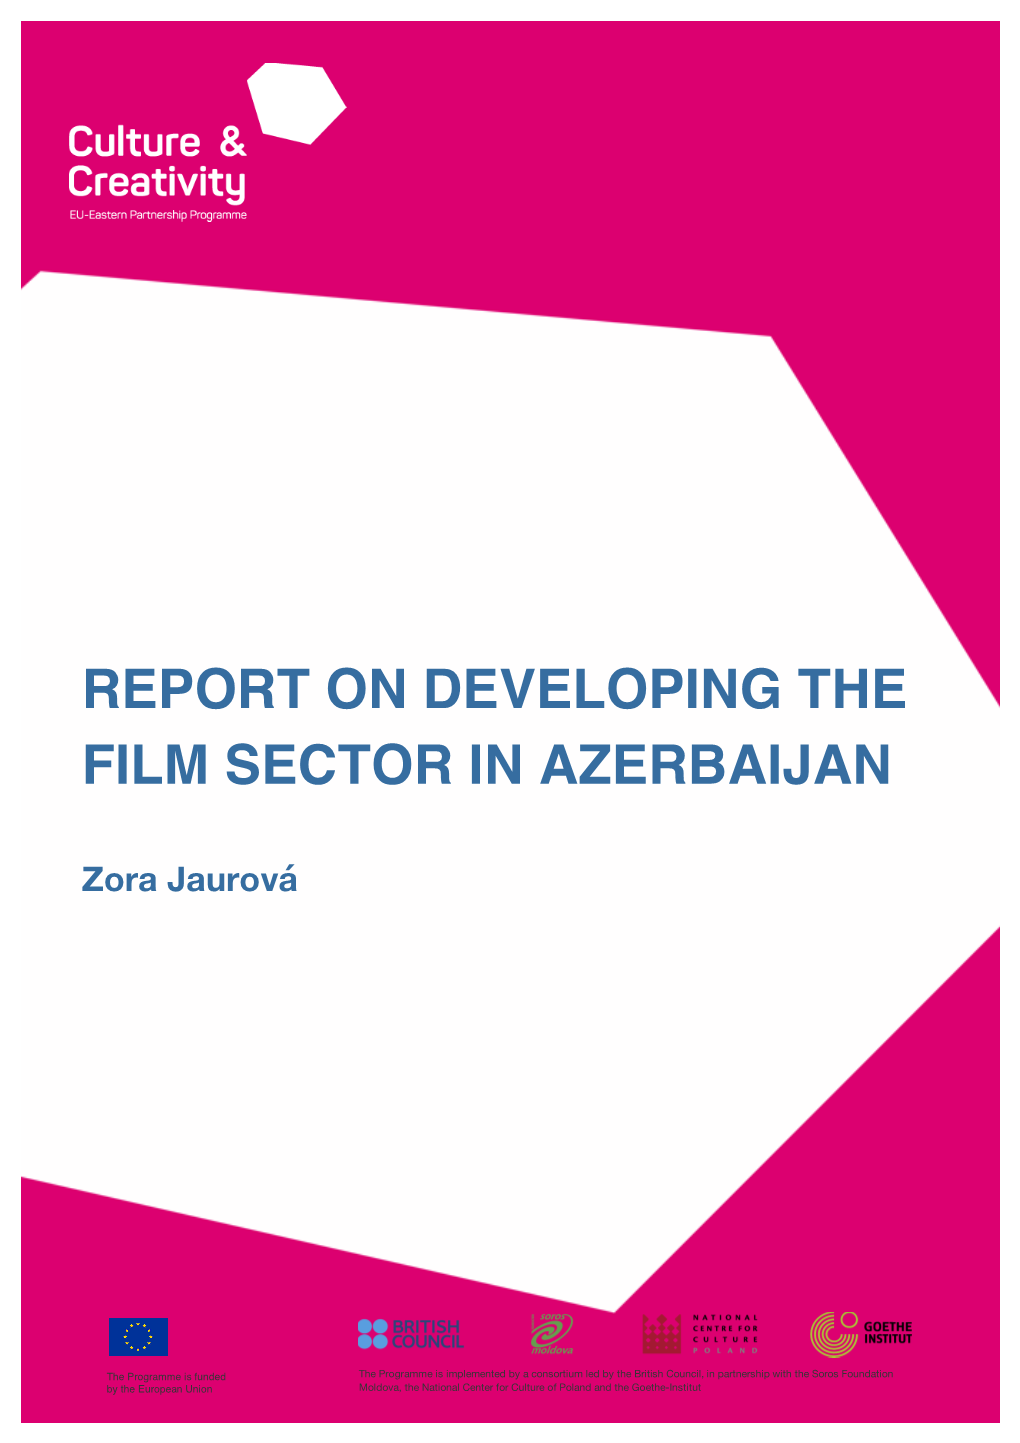 171123 Sub-Sector Report on Film Sector in Azerbaijan (ENG) FINAL